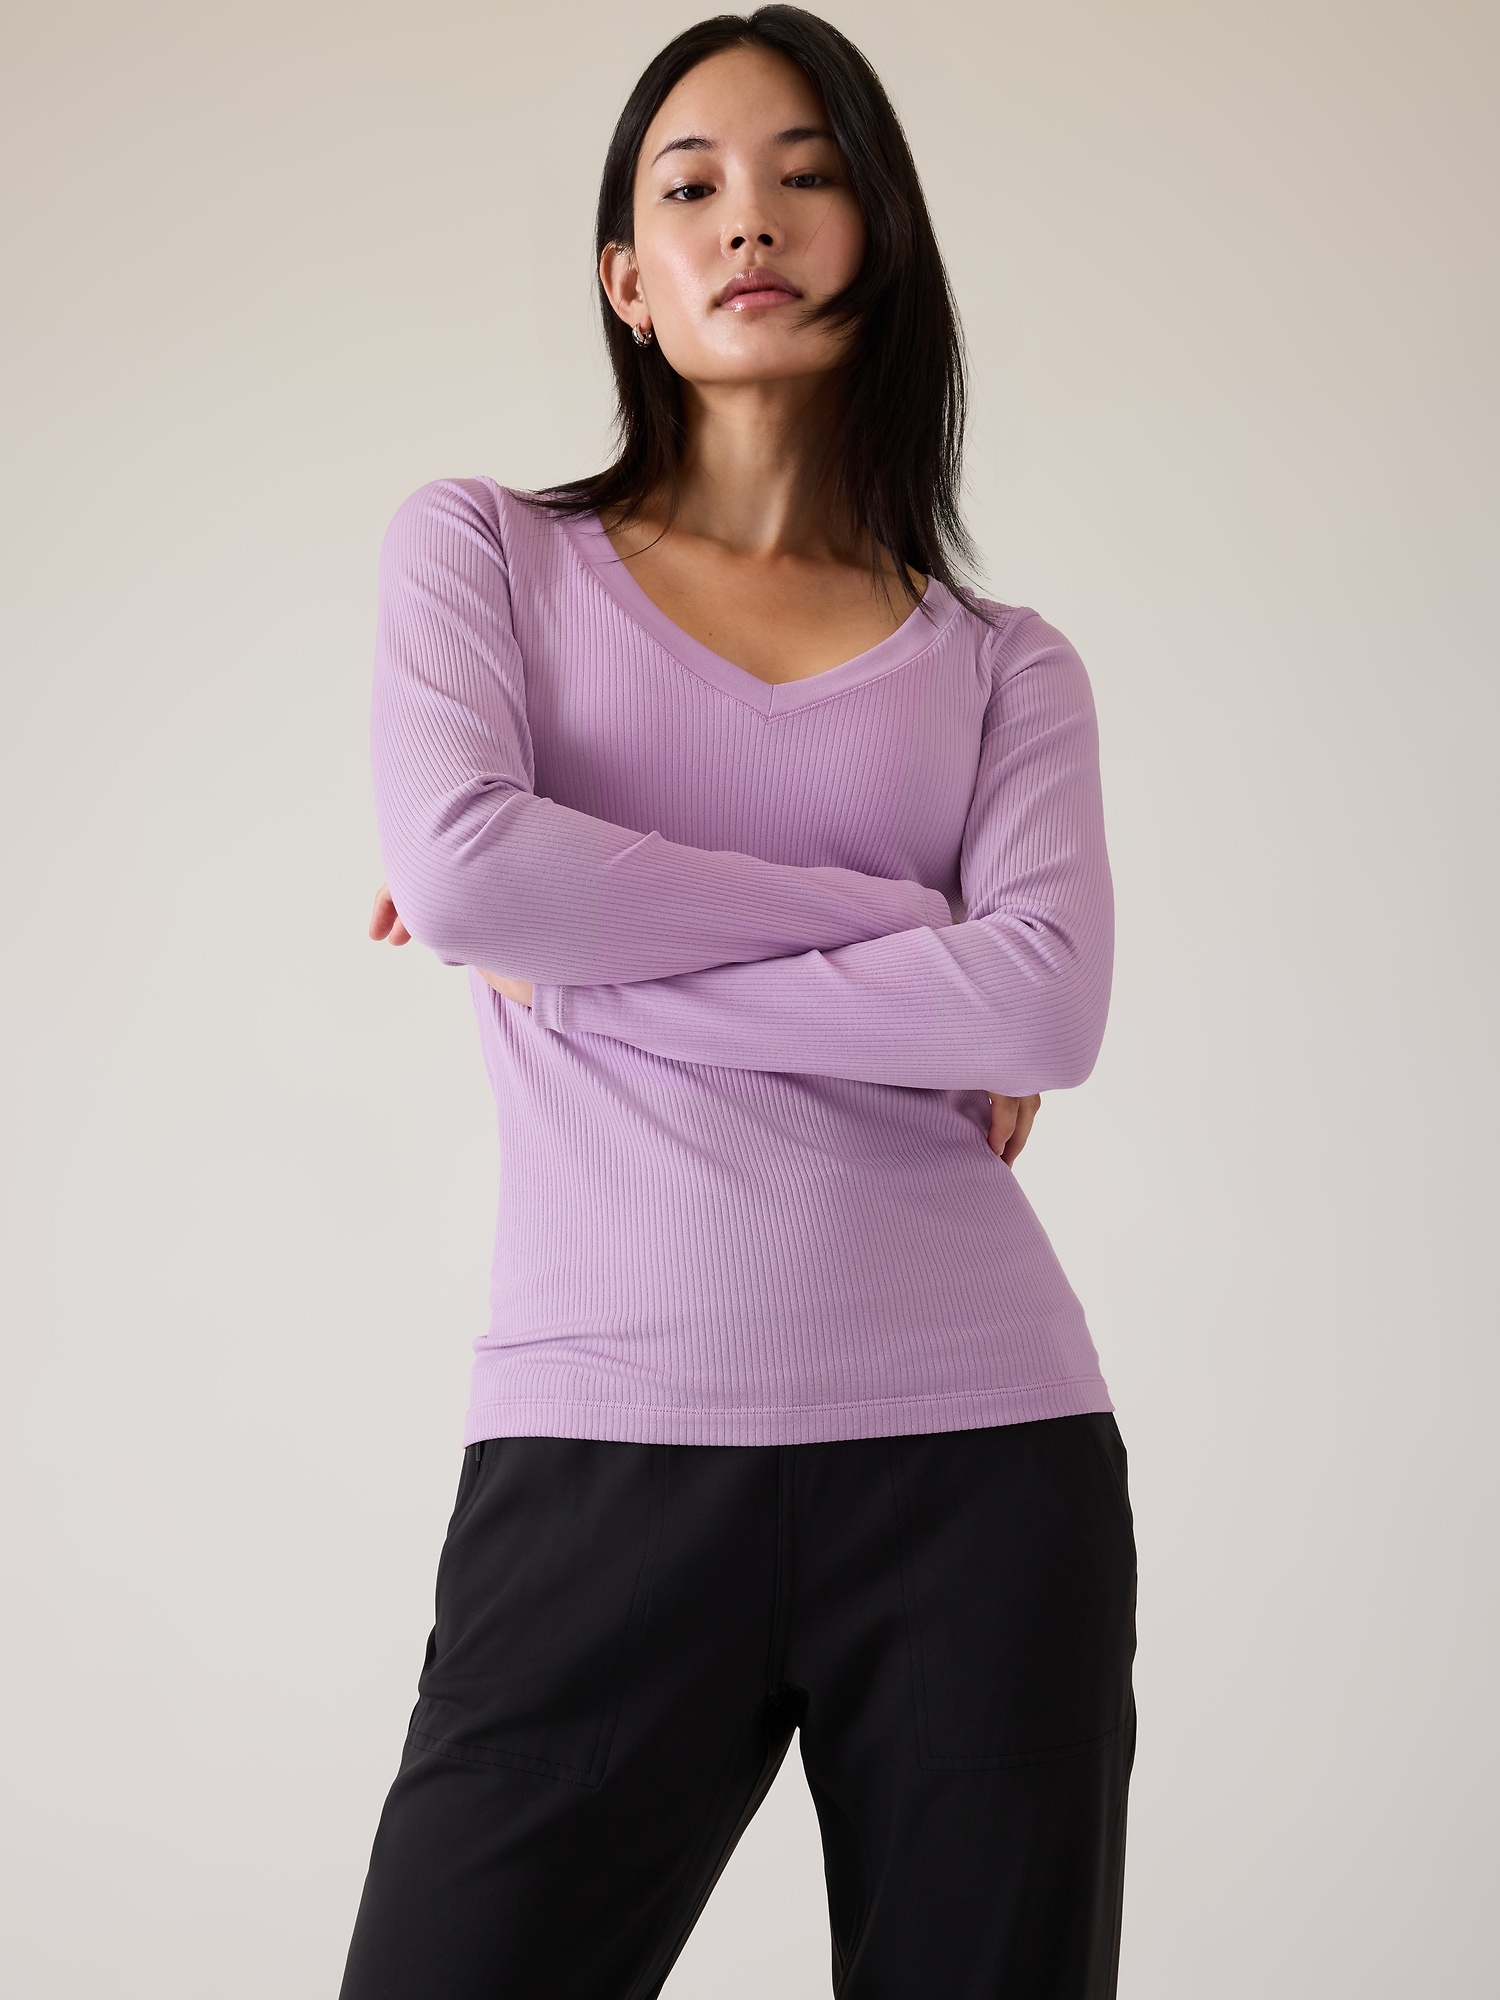 Renew Seamless Leggings | Frosted Lilac